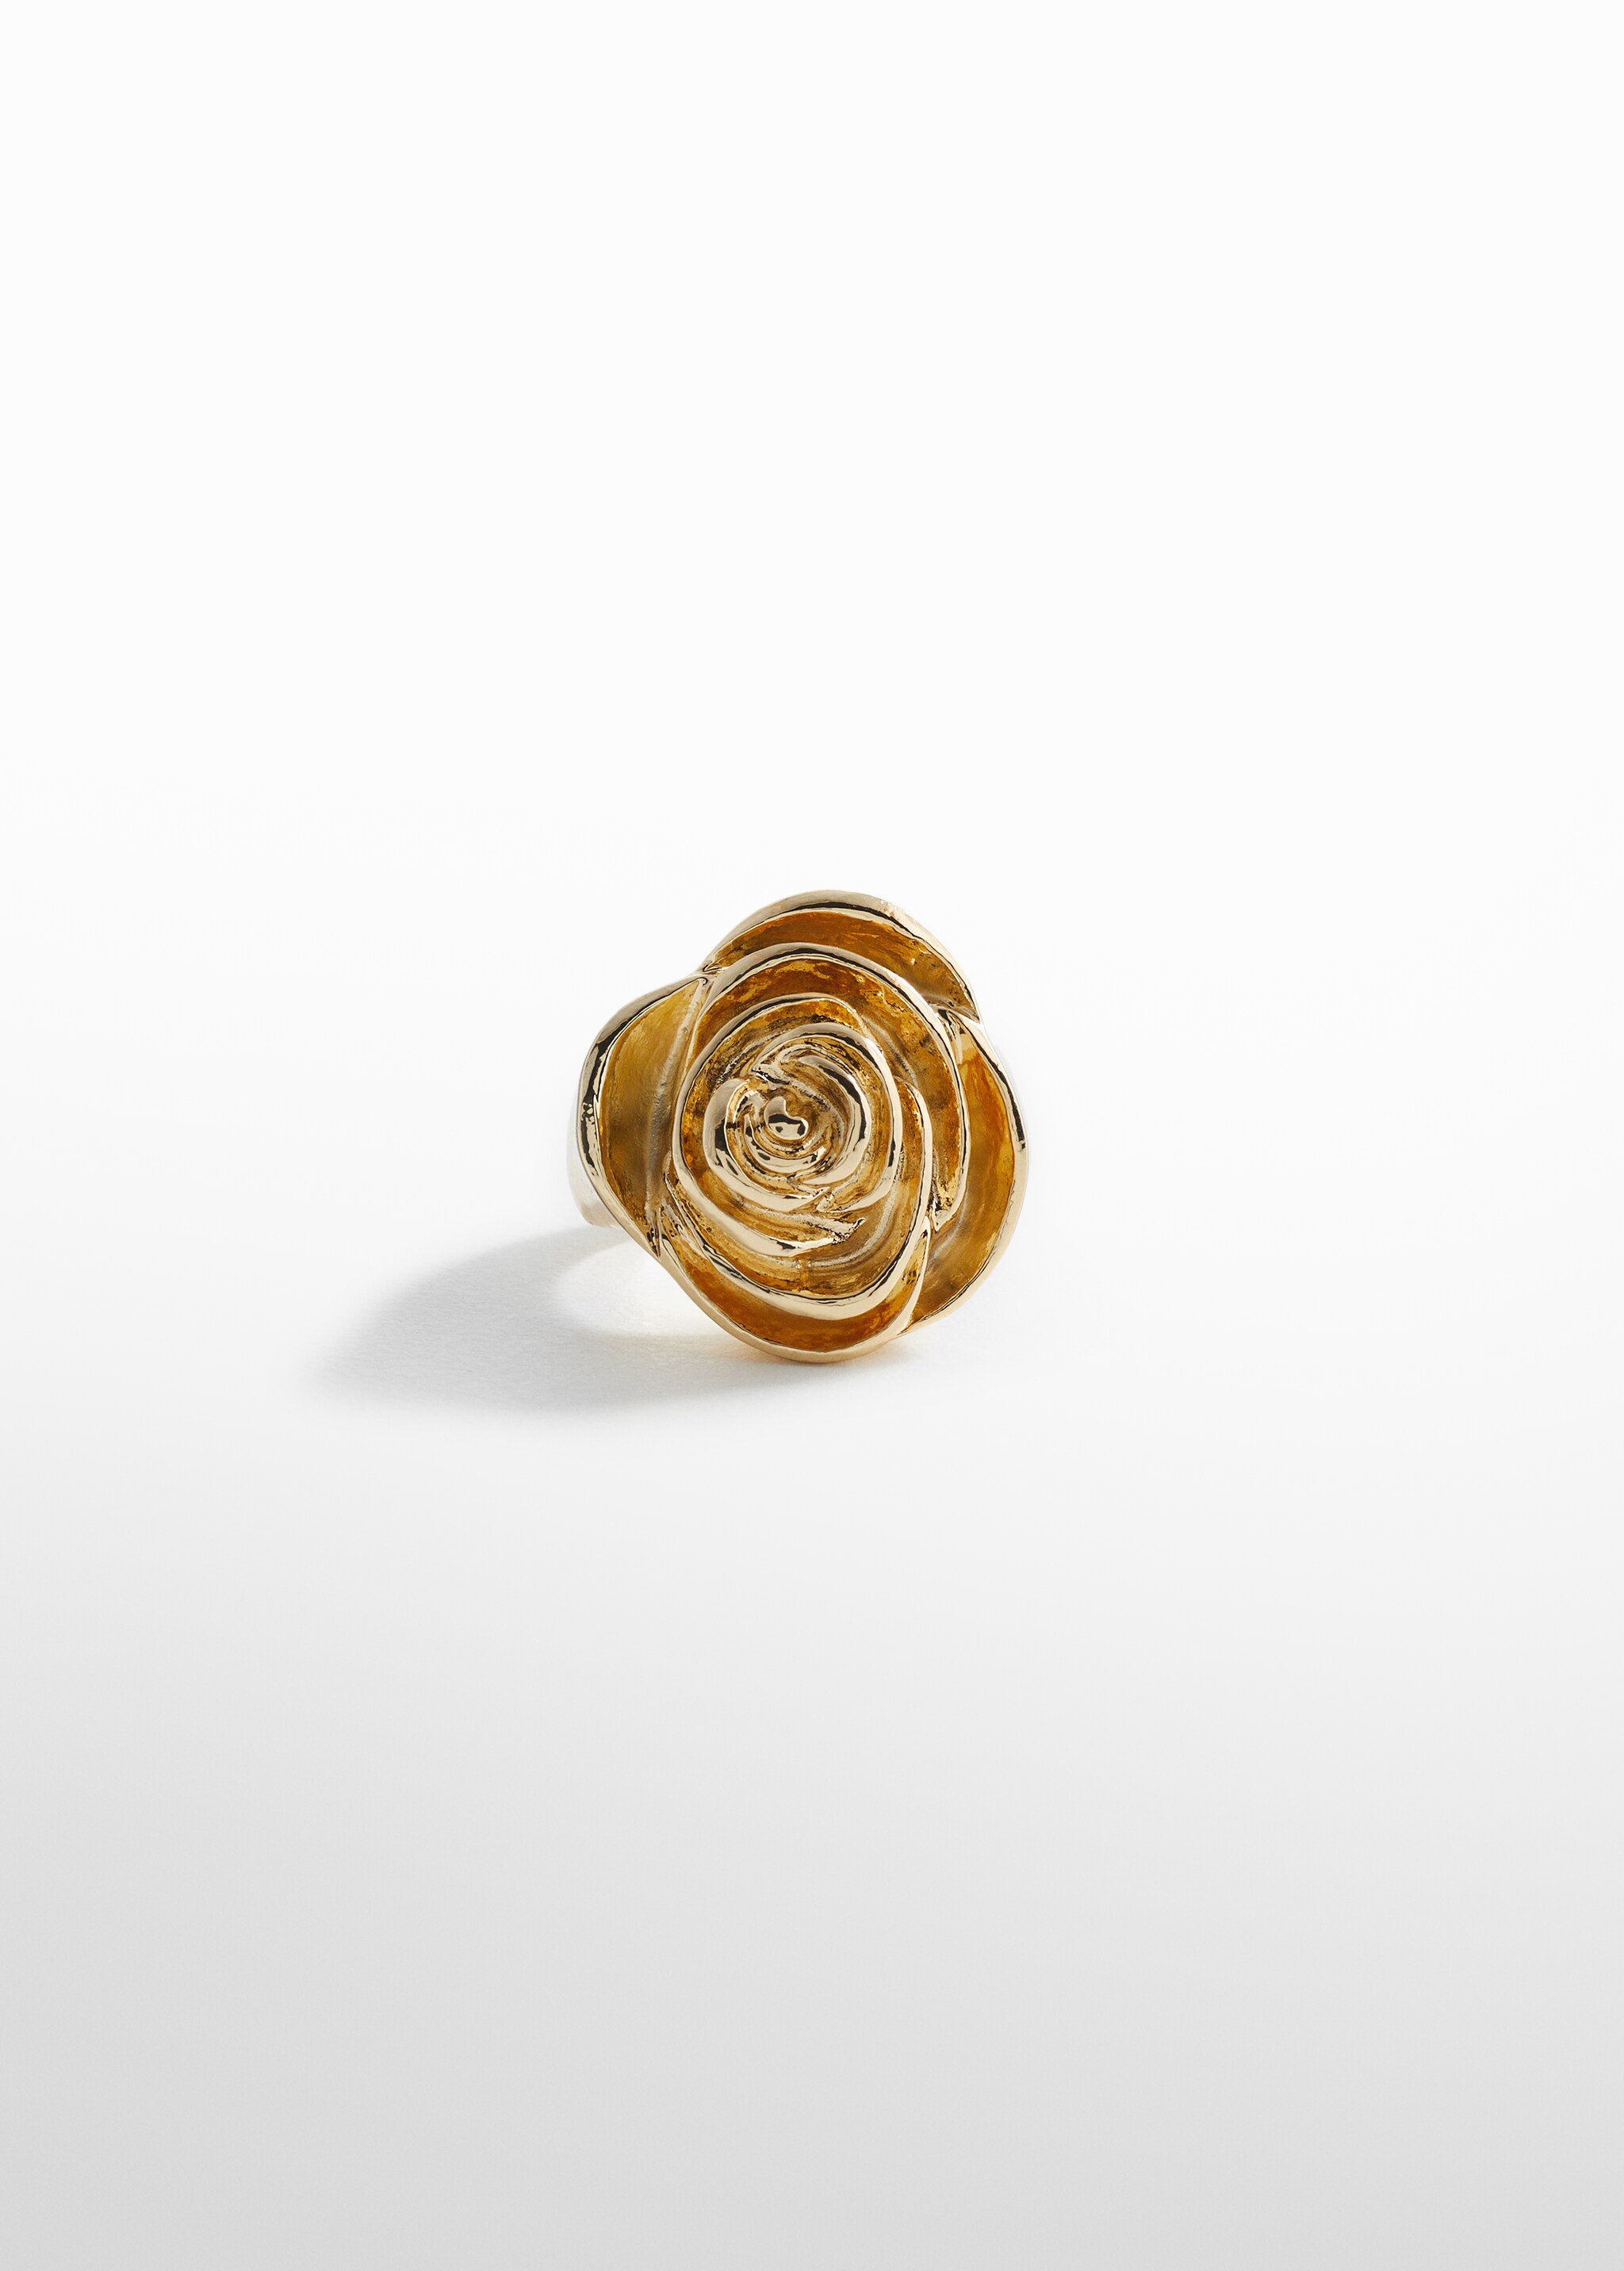 Embossed flower ring - Article without model